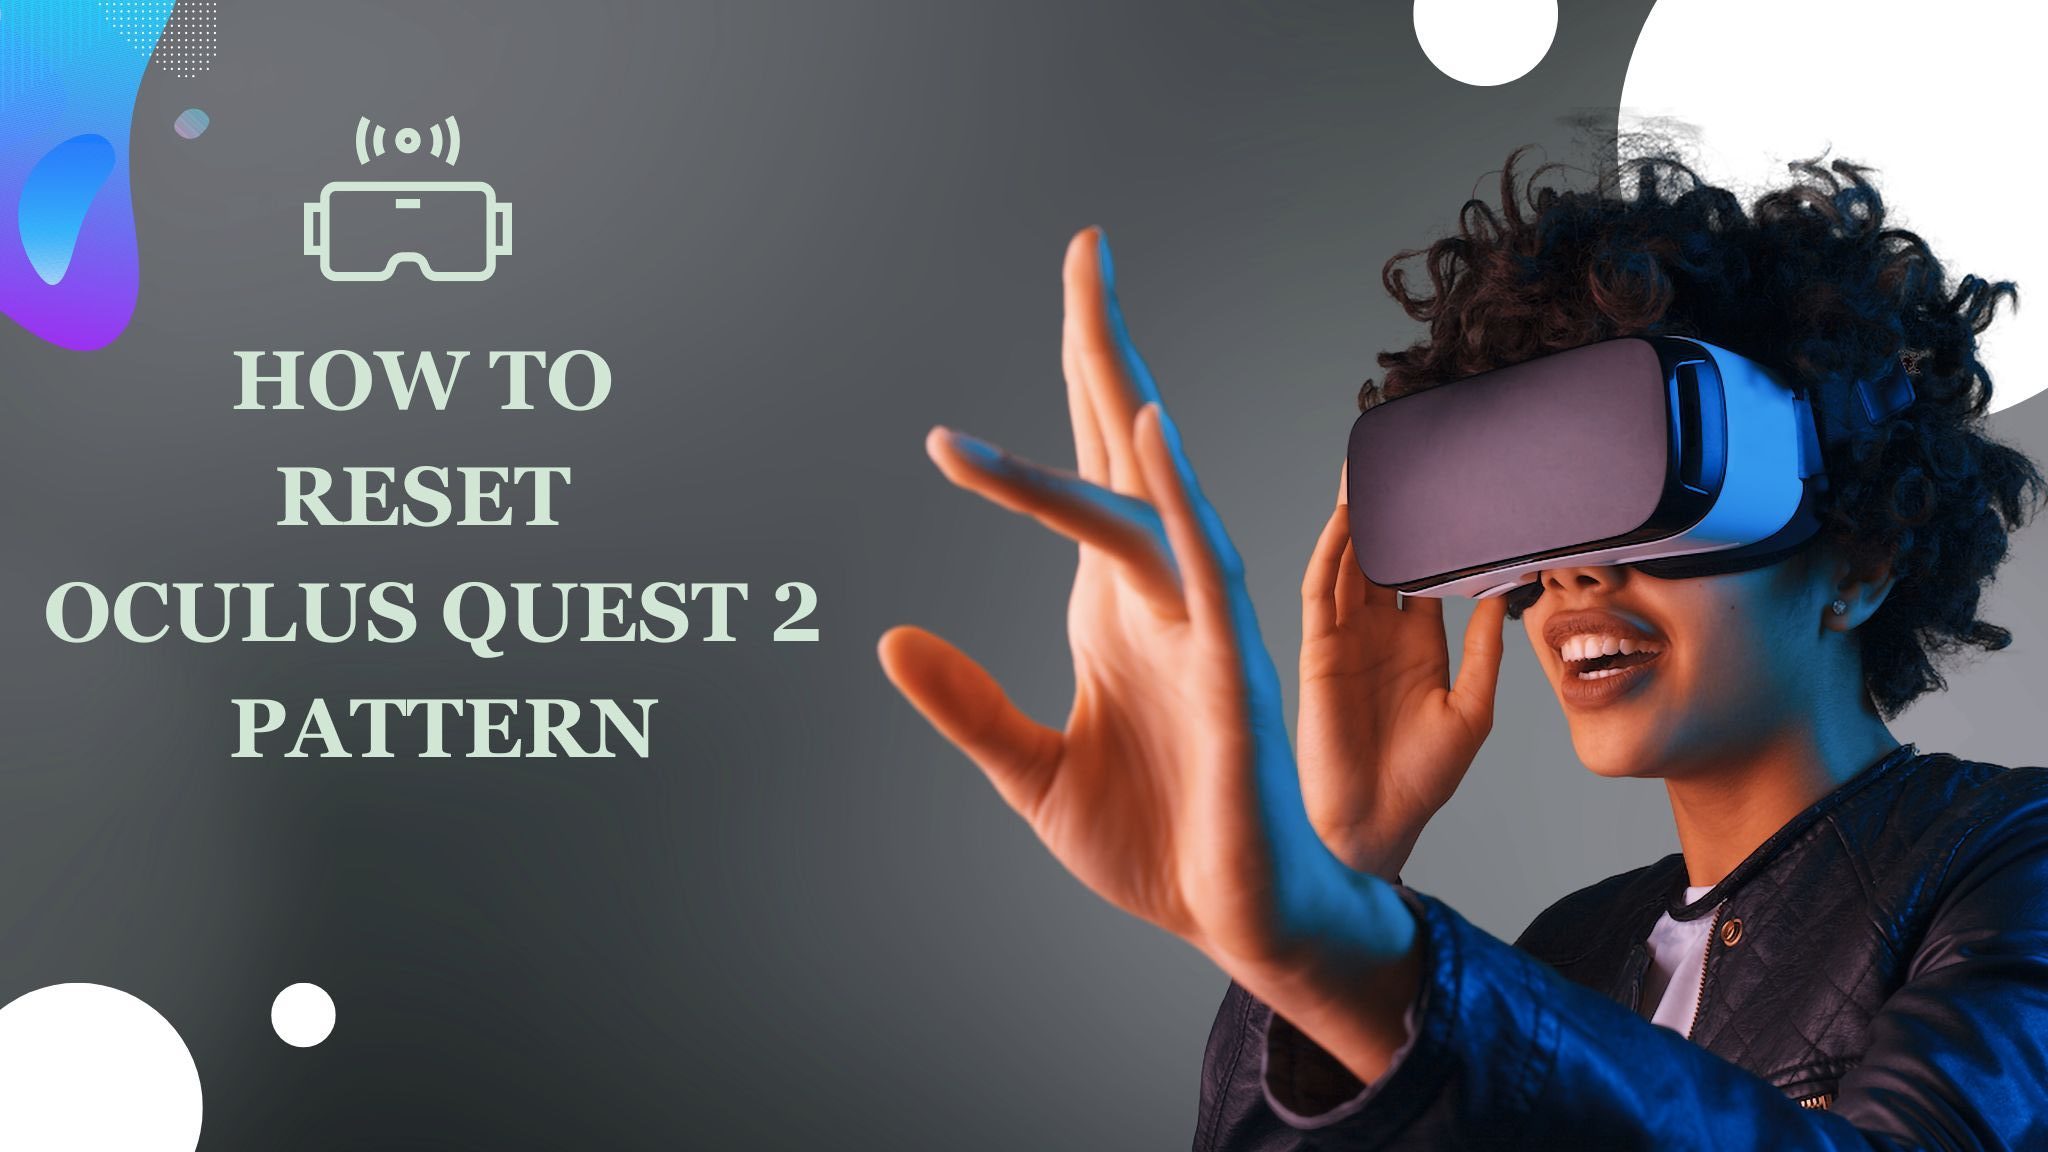 How to RESET OCULUS QUEST 2 Pattern